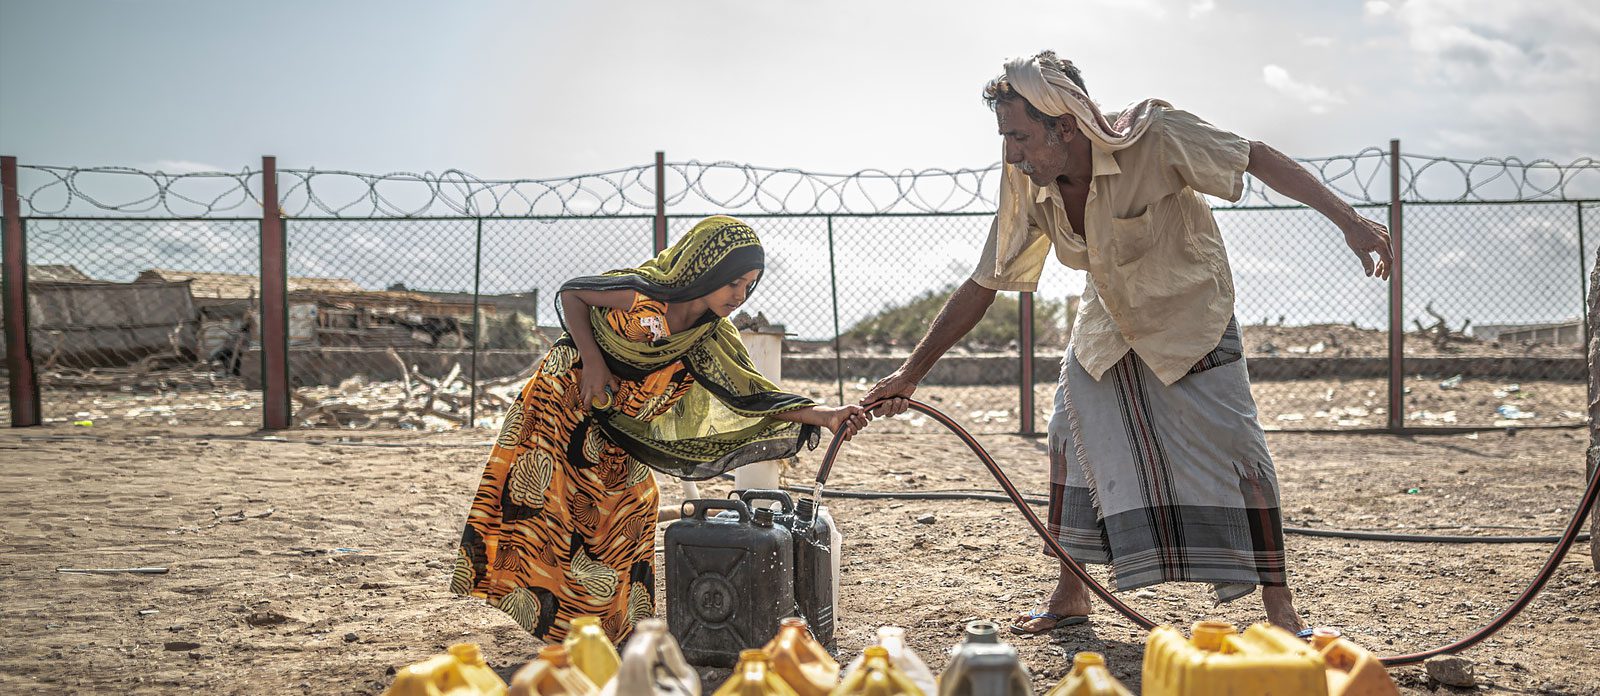 Filling jerry cans with water from the desalination plant in Yemen. Photo: Pablo Tosco